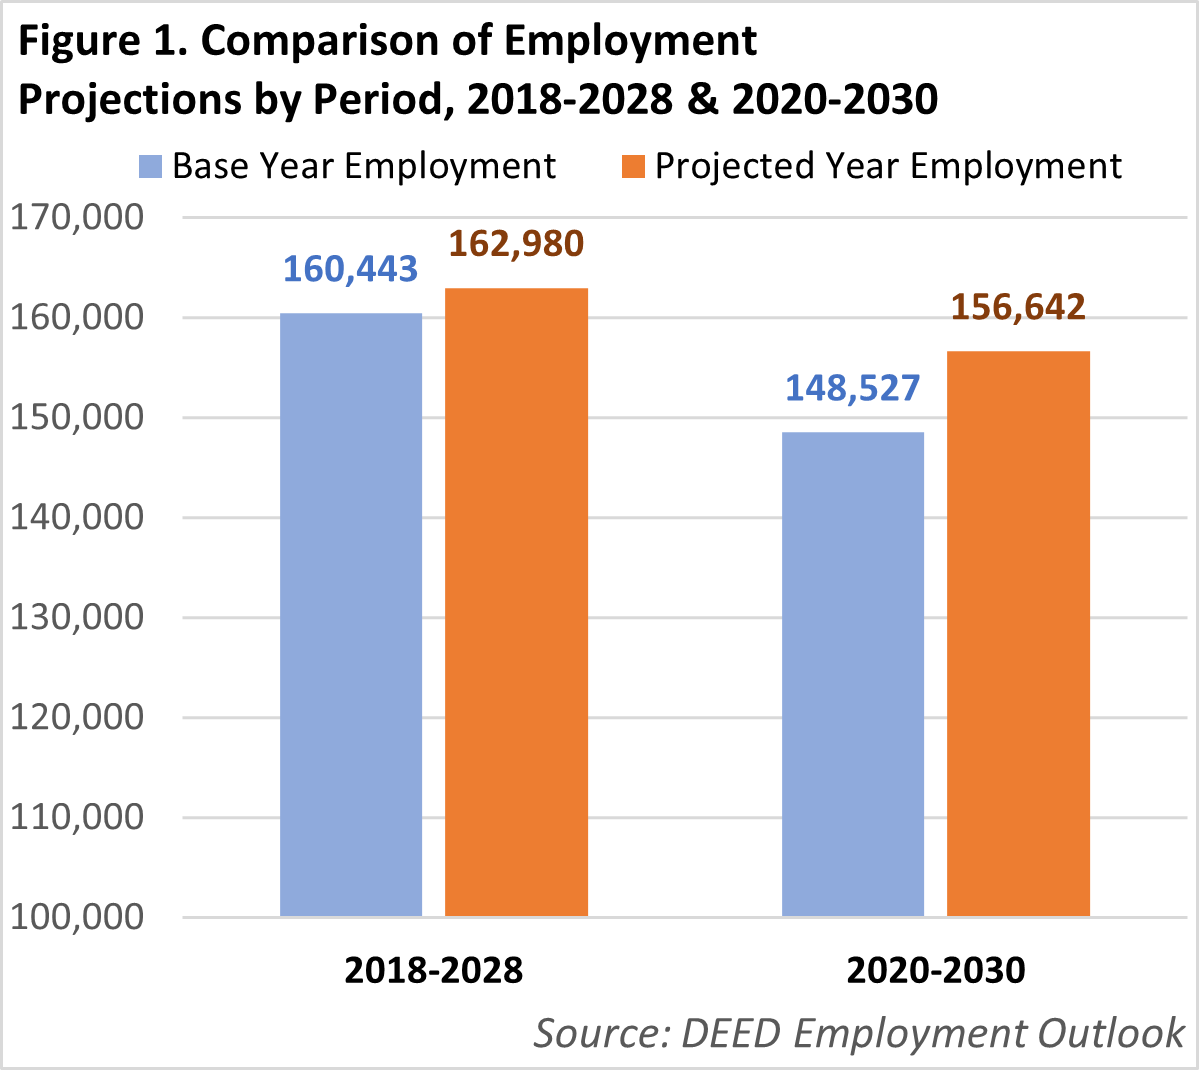 Comparison of Employment Projections by Period